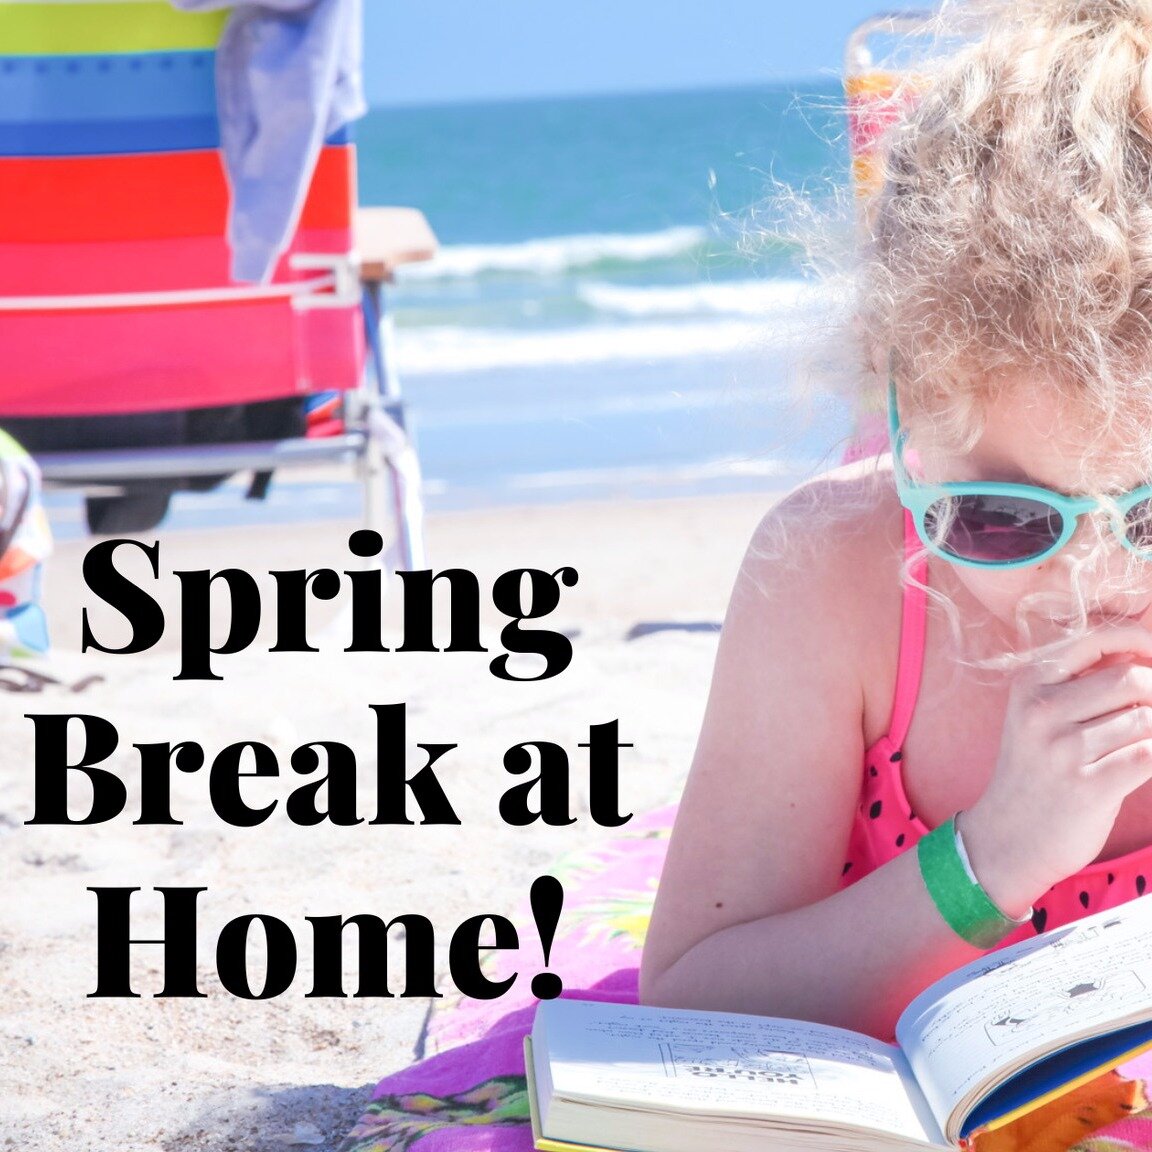 Hey friends, I'm getting back to blogging &amp; I've missed putting learning ideas together over there for you! 

Up on the blog today - I&rsquo;ve got some Spring Break at home ideas for you. Some that are more of the hands-on parent approach as wel